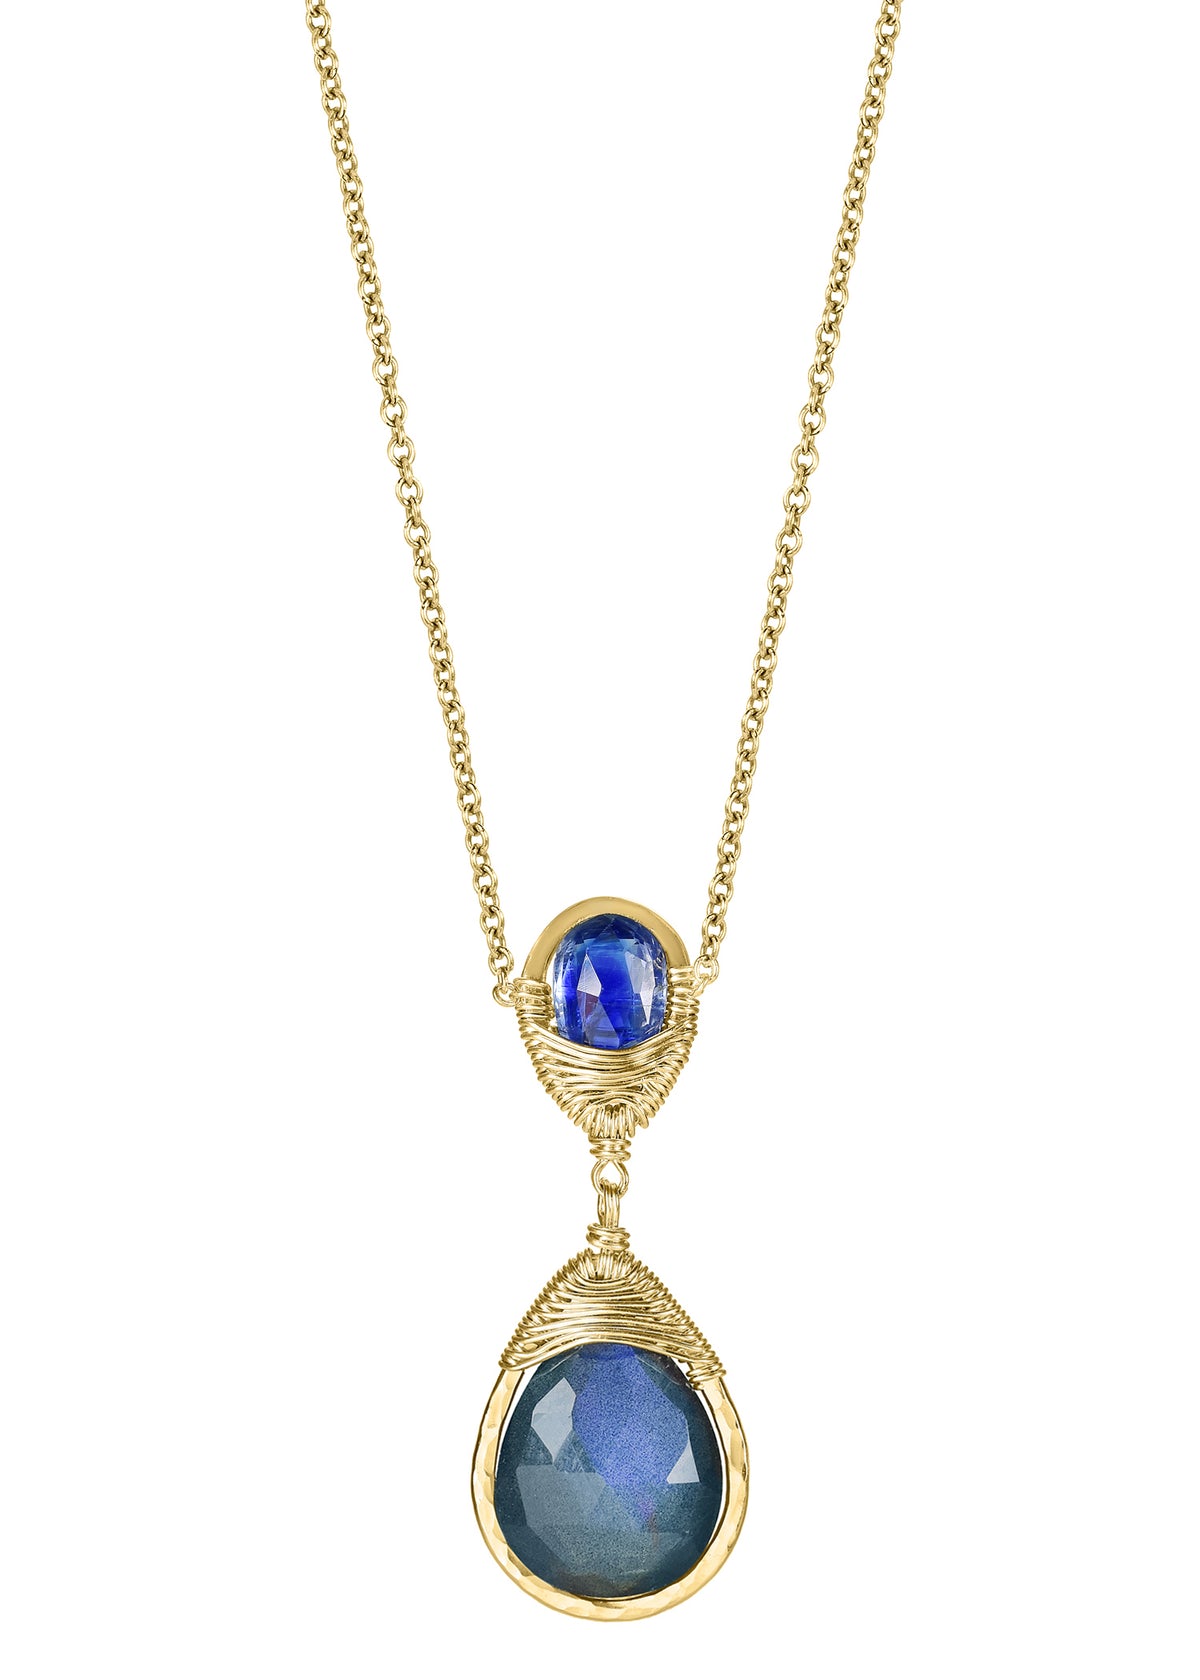 Kyanite Labradorite 14k gold fill Necklace measures 17&quot; in length Pendant measures 1-1/4&quot; in length and 7/16&quot; in width at the widest point Handmade in our Los Angeles studio